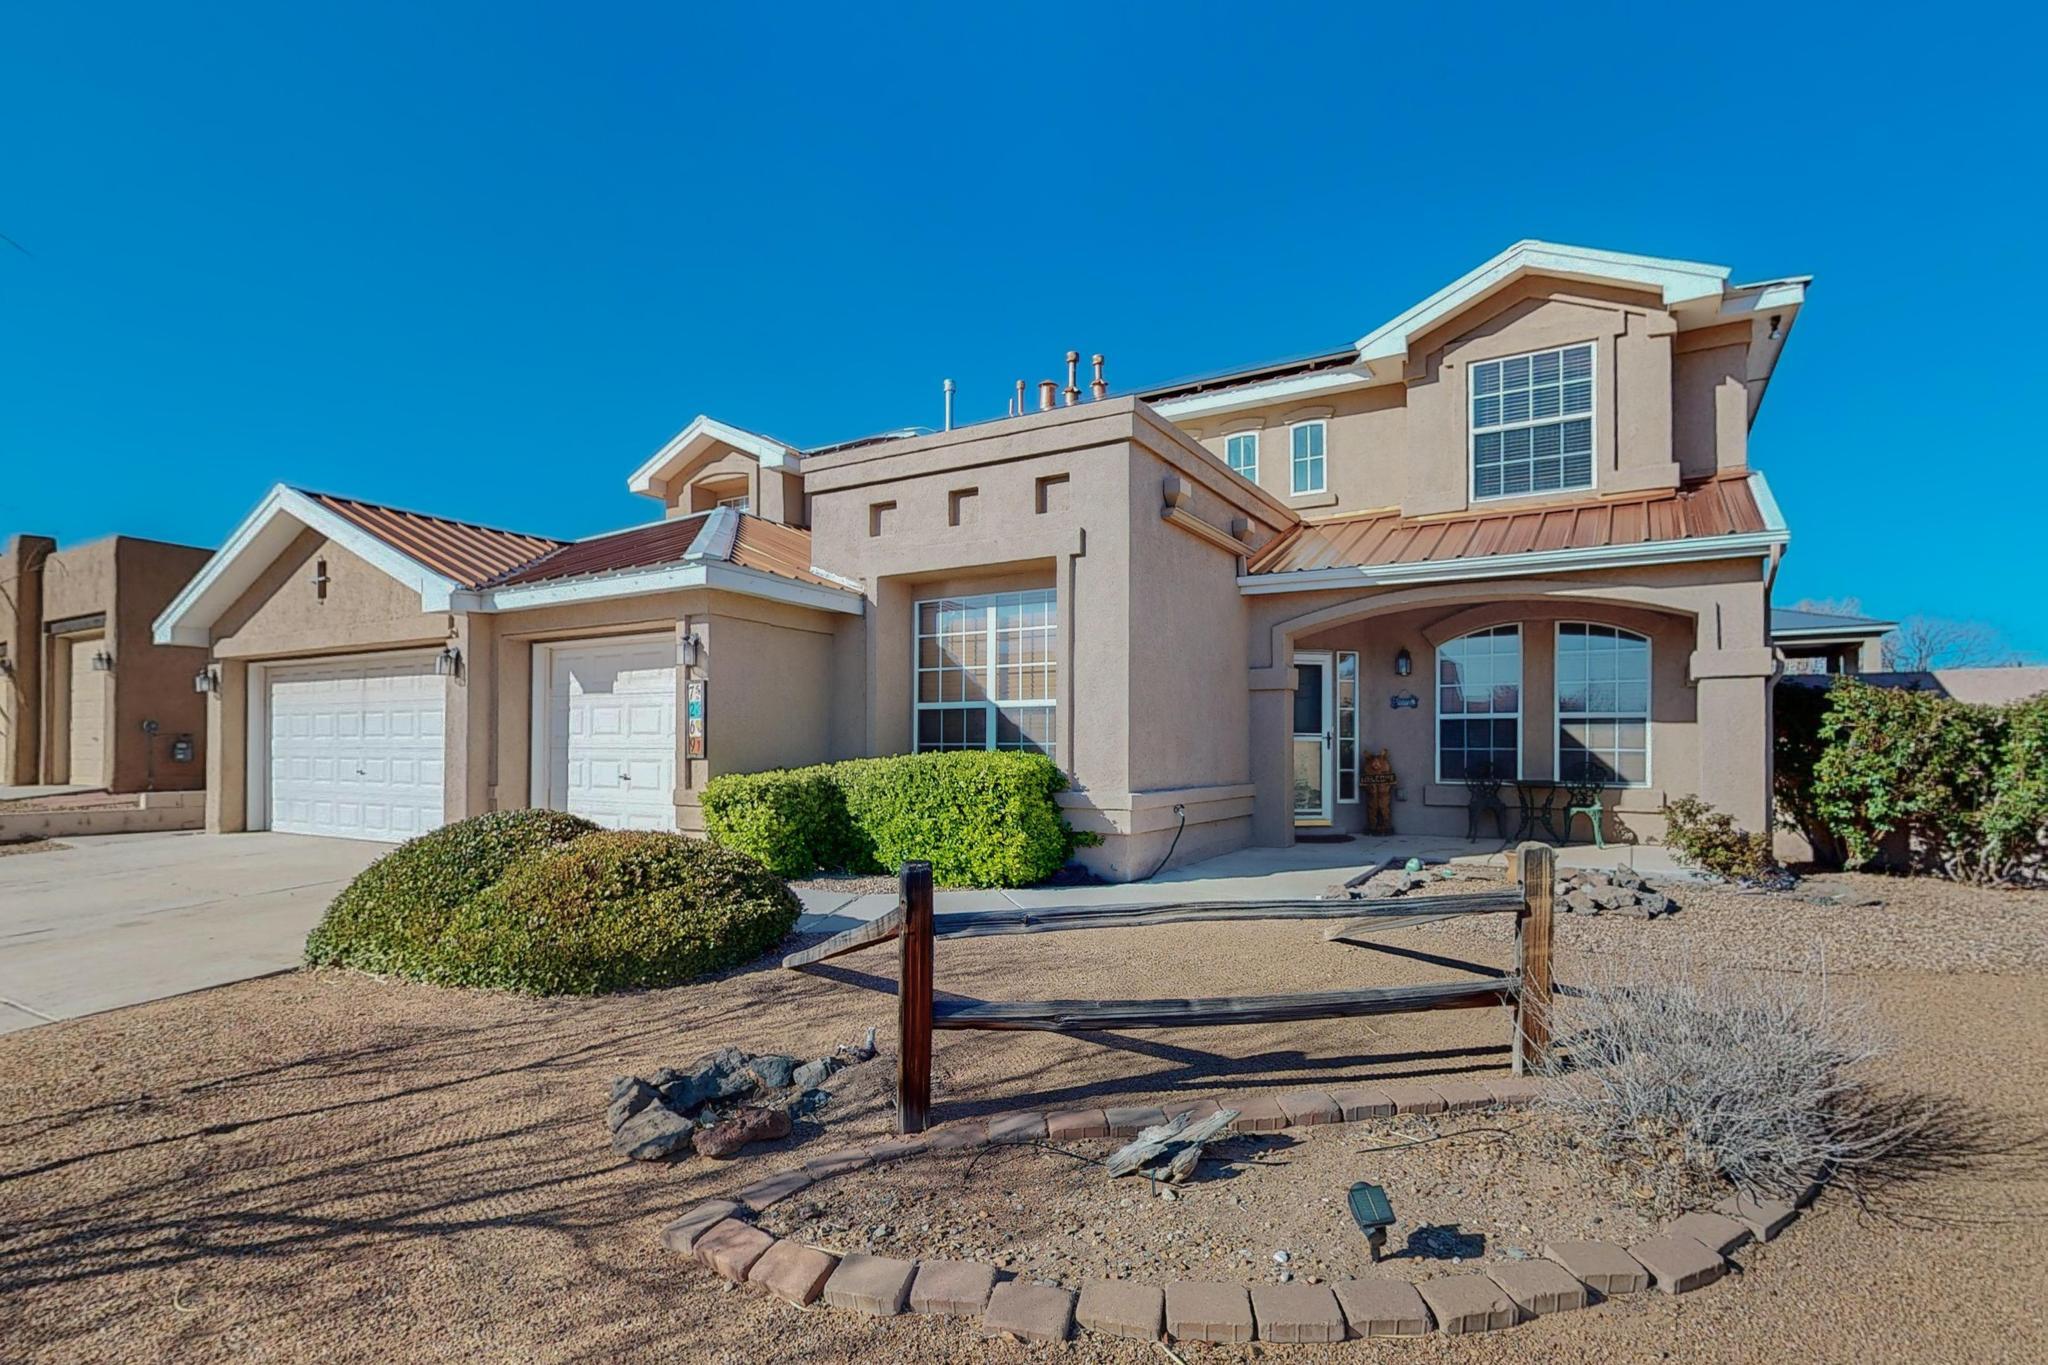 7269 Assisi Hills Road NE, Rio Rancho, New Mexico 87144, 4 Bedrooms Bedrooms, ,4 BathroomsBathrooms,Residential,For Sale,7269 Assisi Hills Road NE,1059632